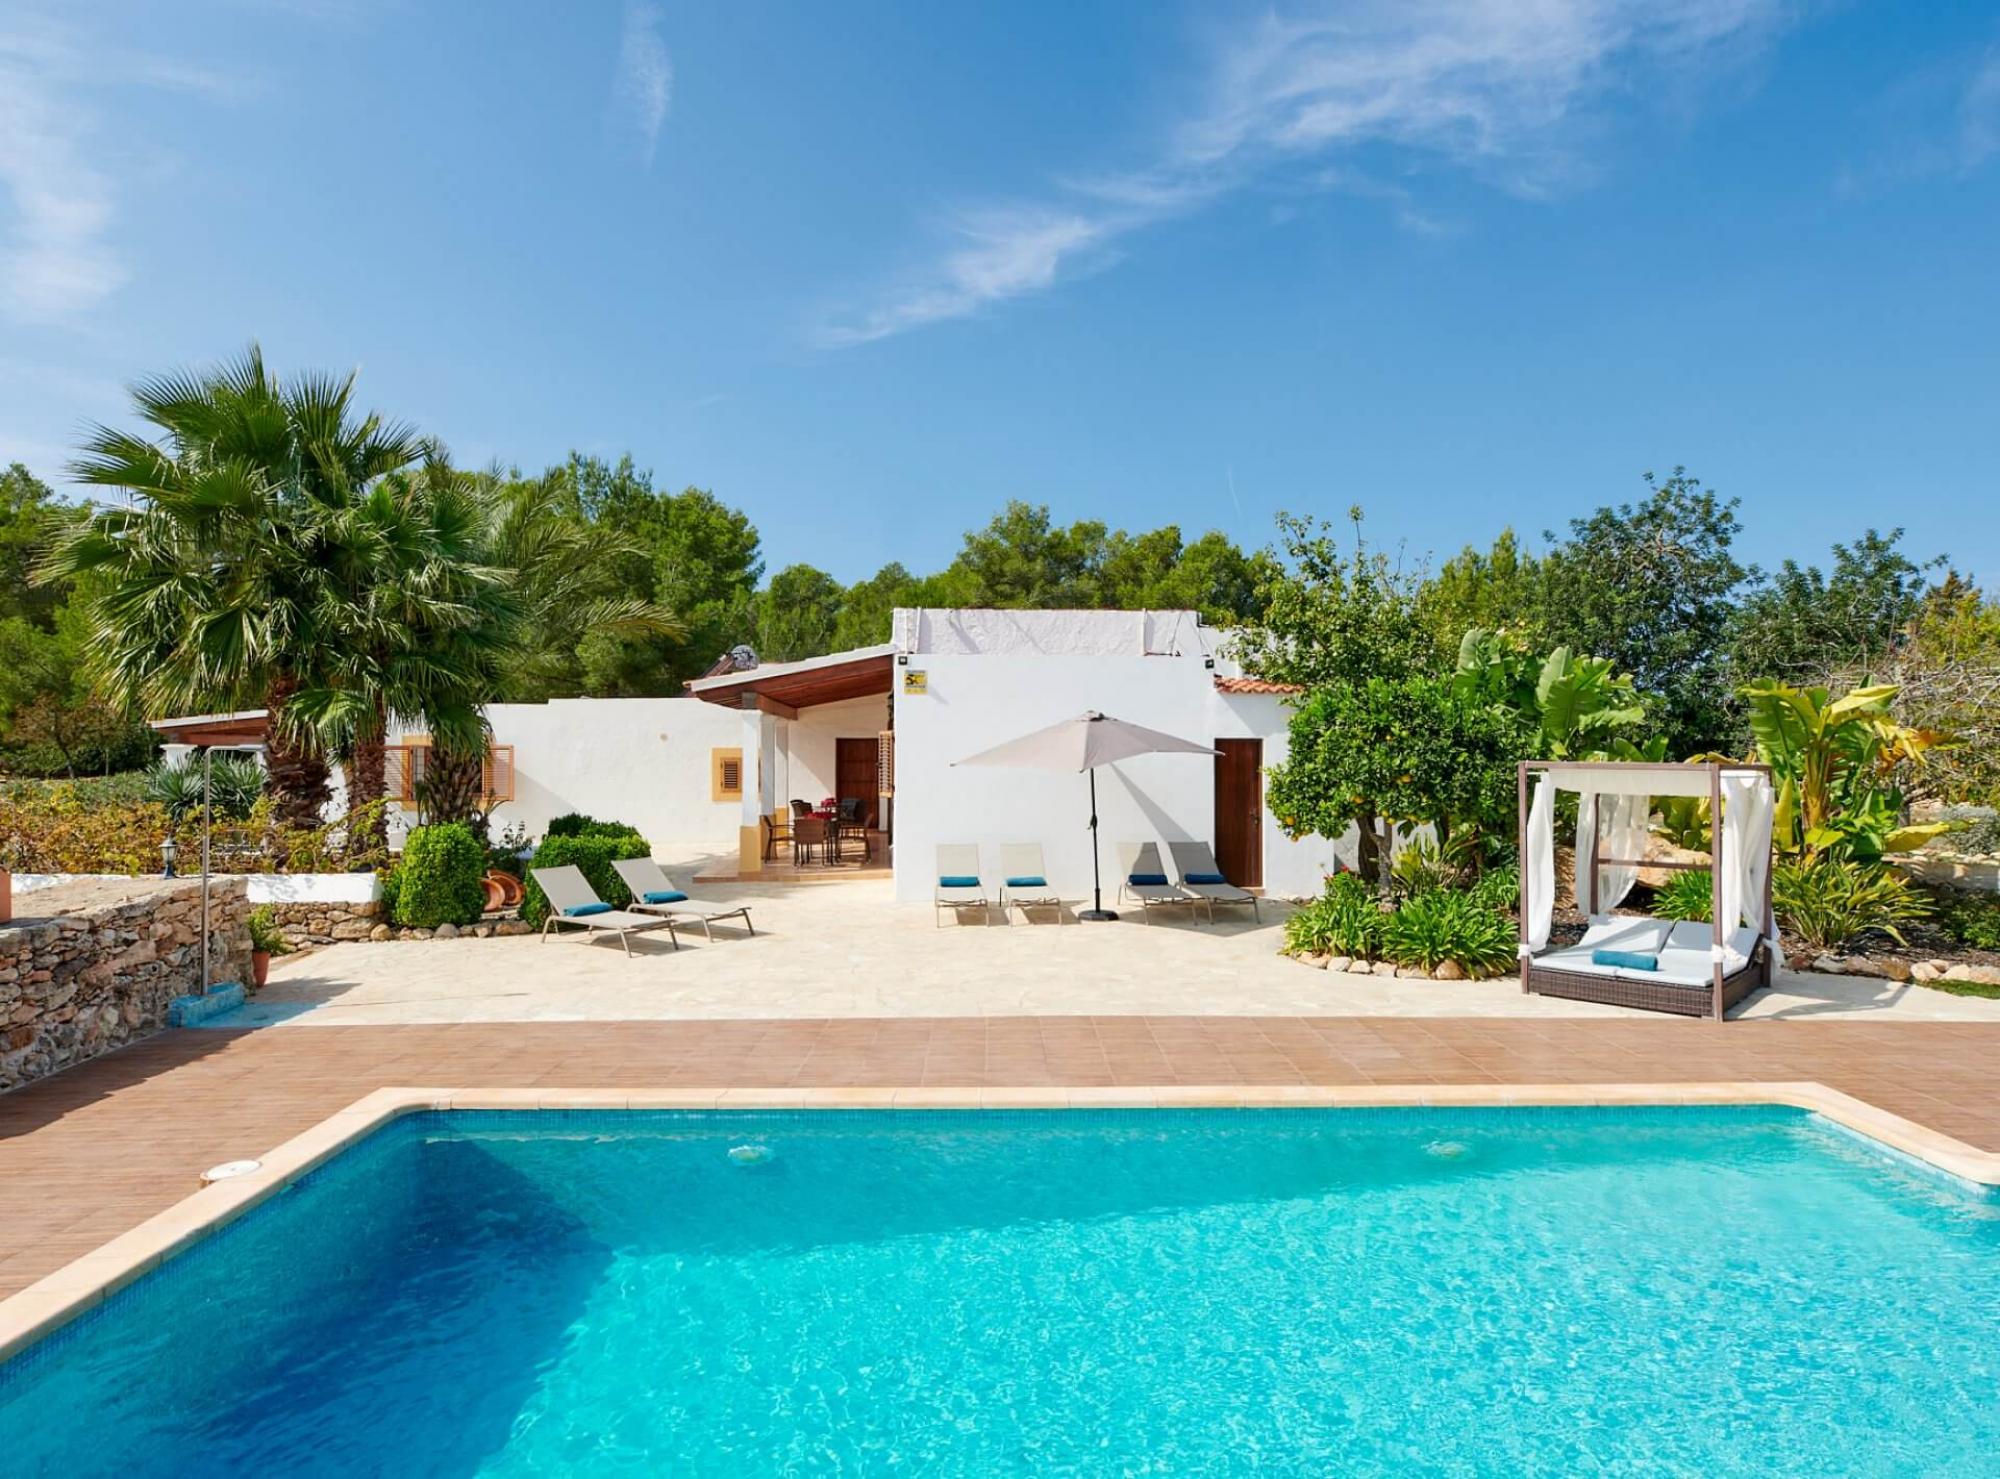 Property Image 2 - Classic Mediterranean Style Villa Surrounded by Nature
